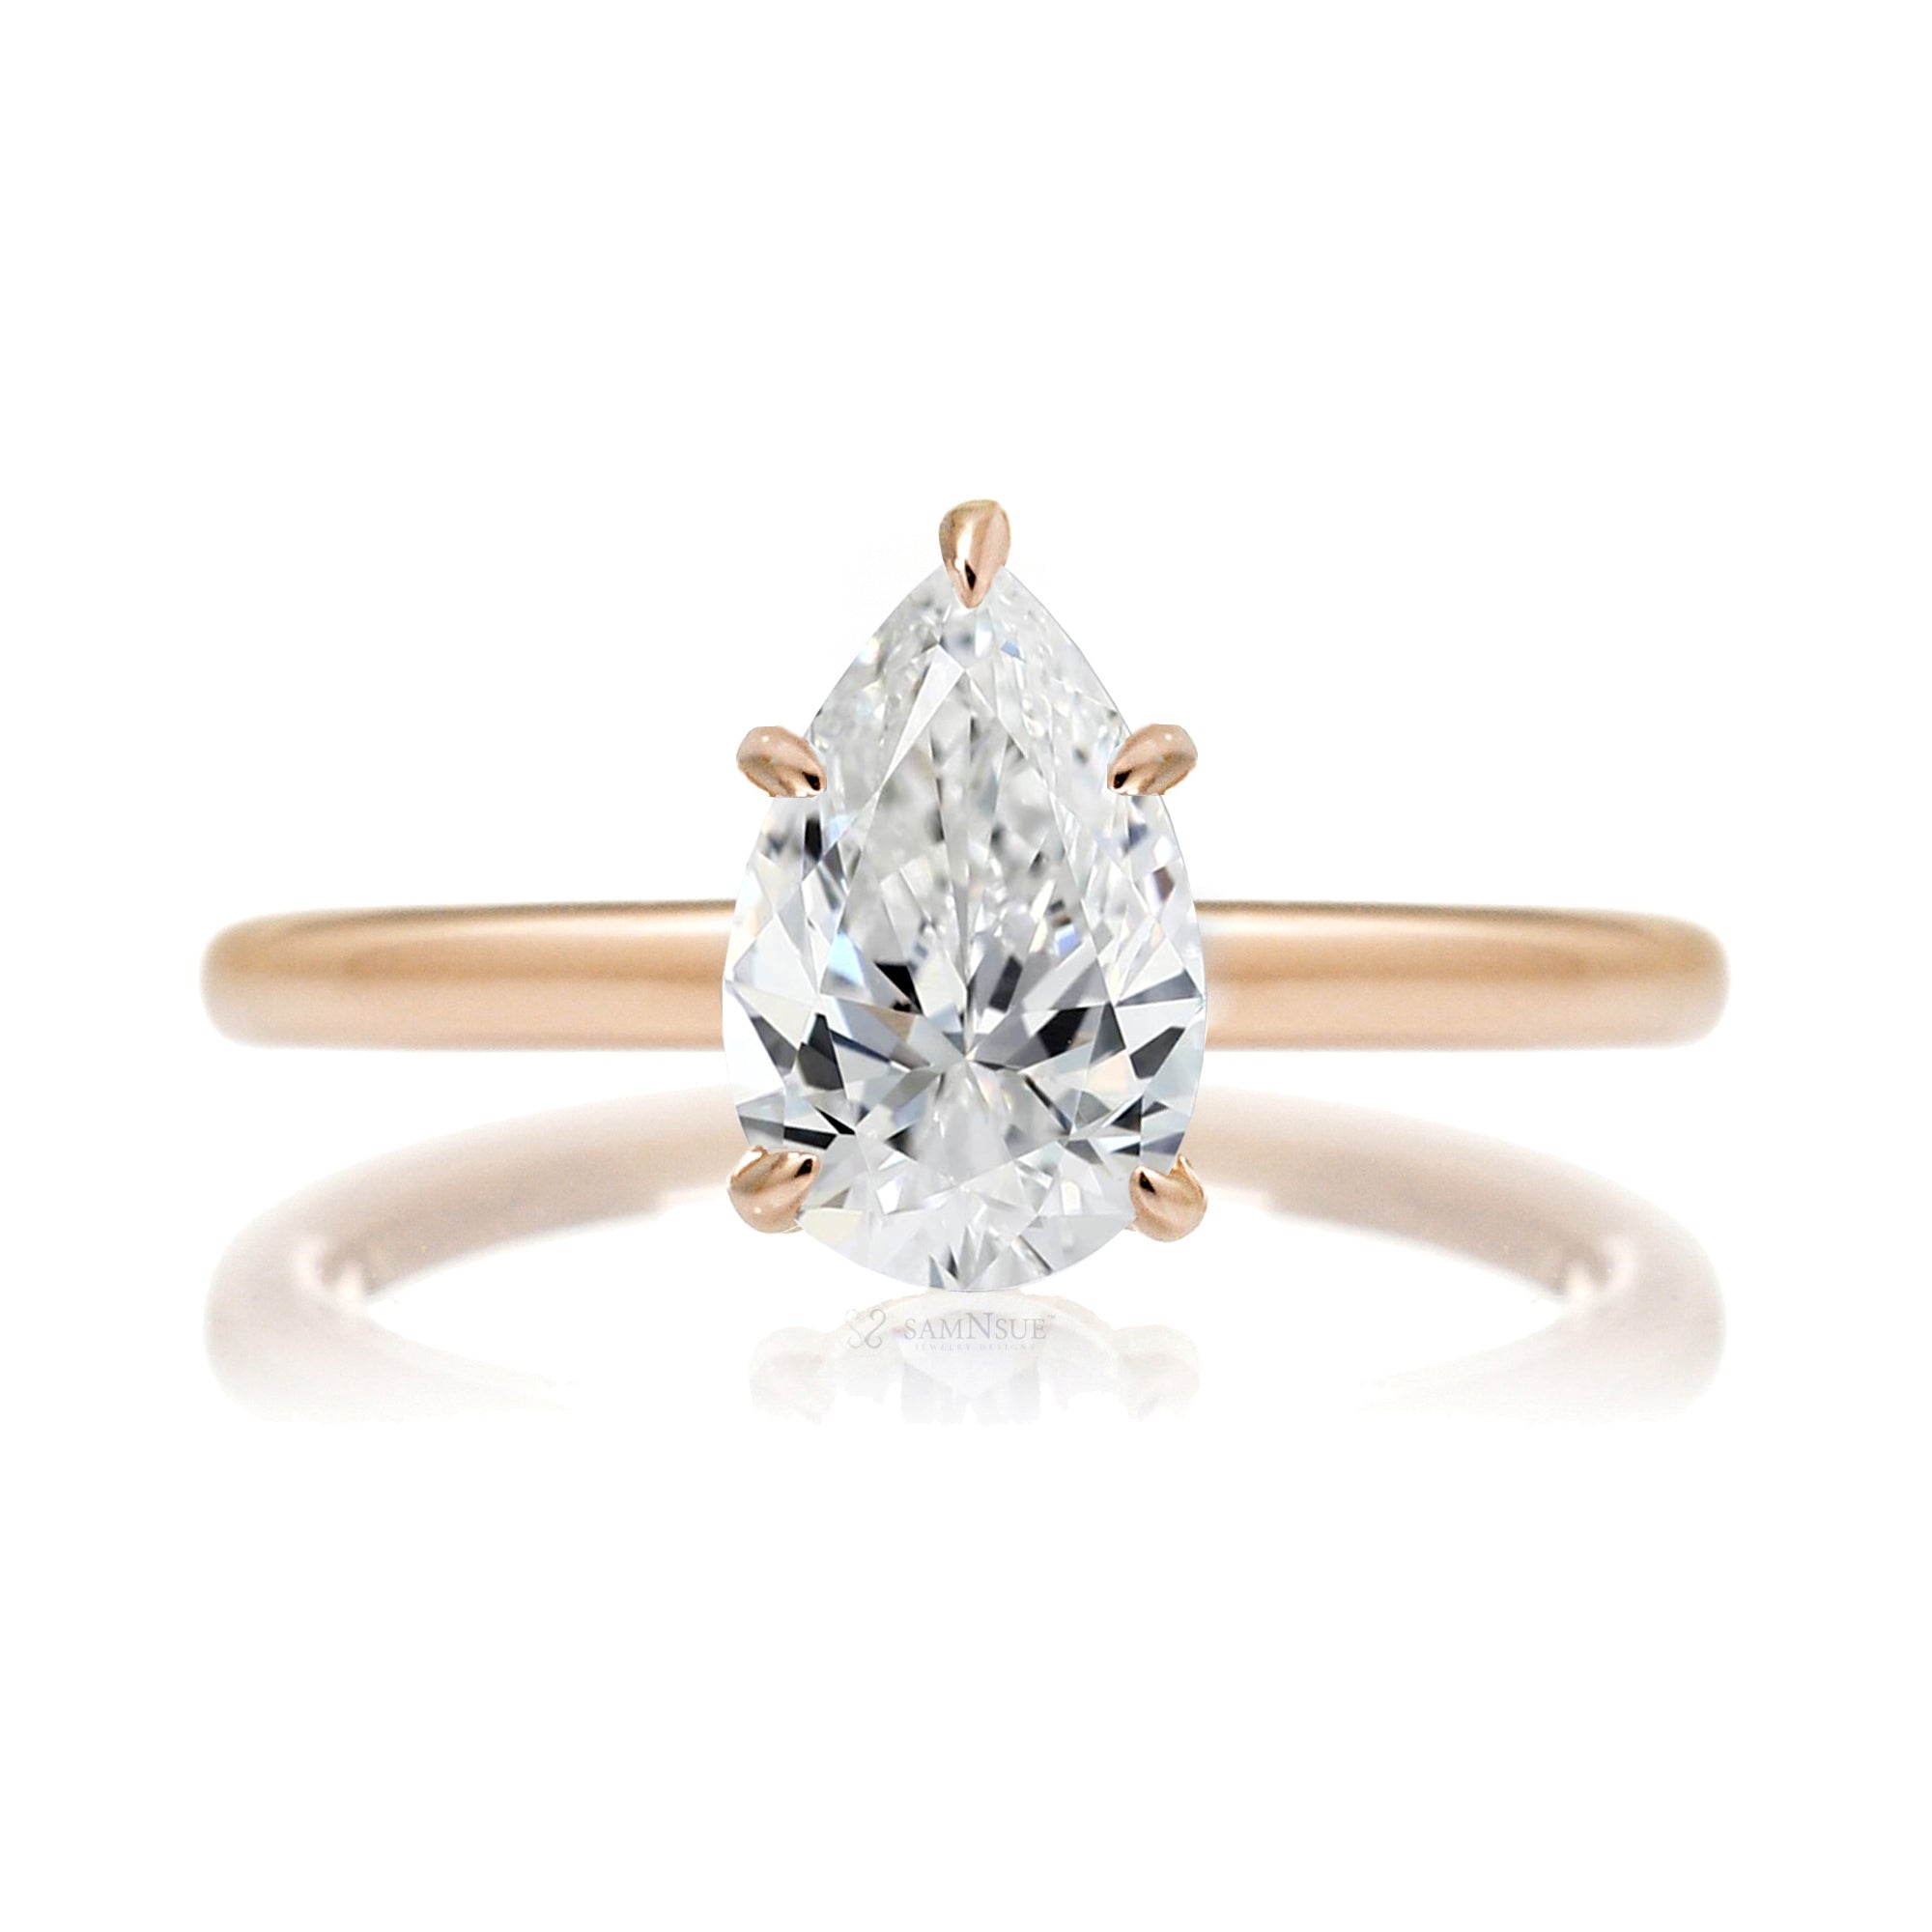 Pear cut solitaire diamond engagement ring with a hidden halo and solid polished band in rose gold